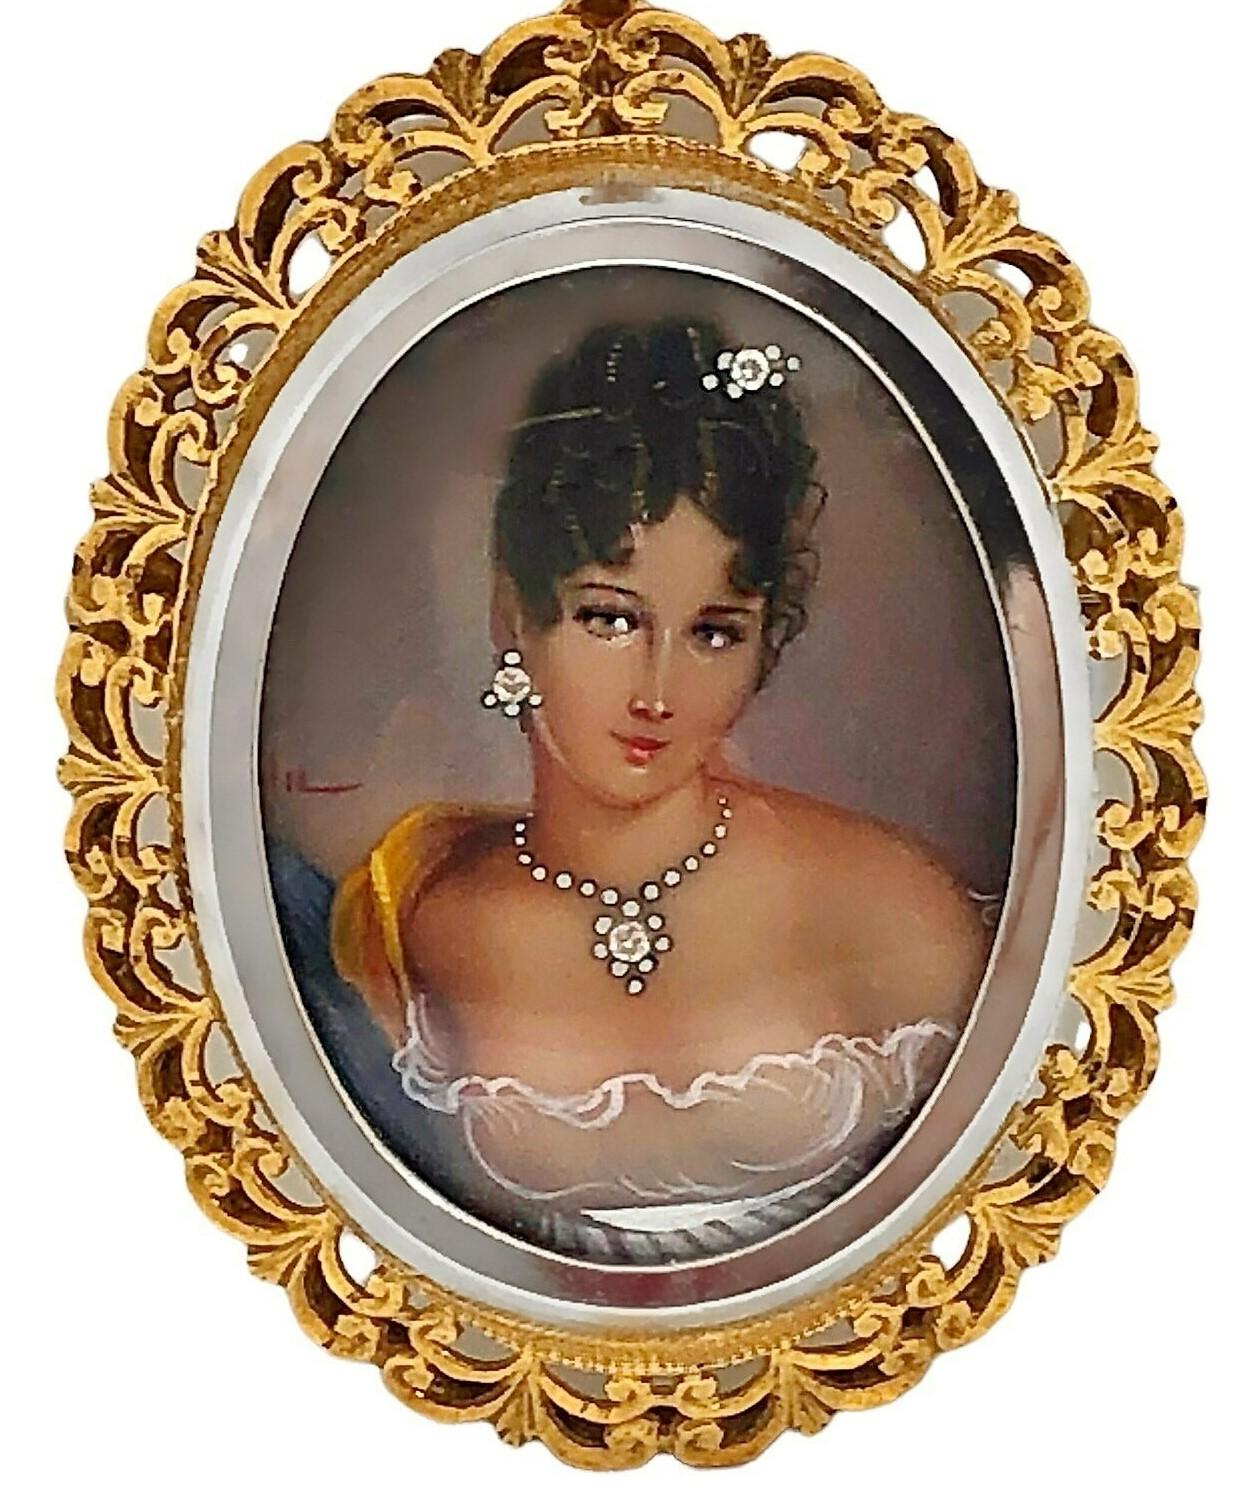 This lovely 18K yellow gold and hand painted portrait piece is replete with extraordinary details. The crystal covered portrait features an elegant lady dressed in traditional garb, accented with three diamonds. The 18K yellow gold frame is